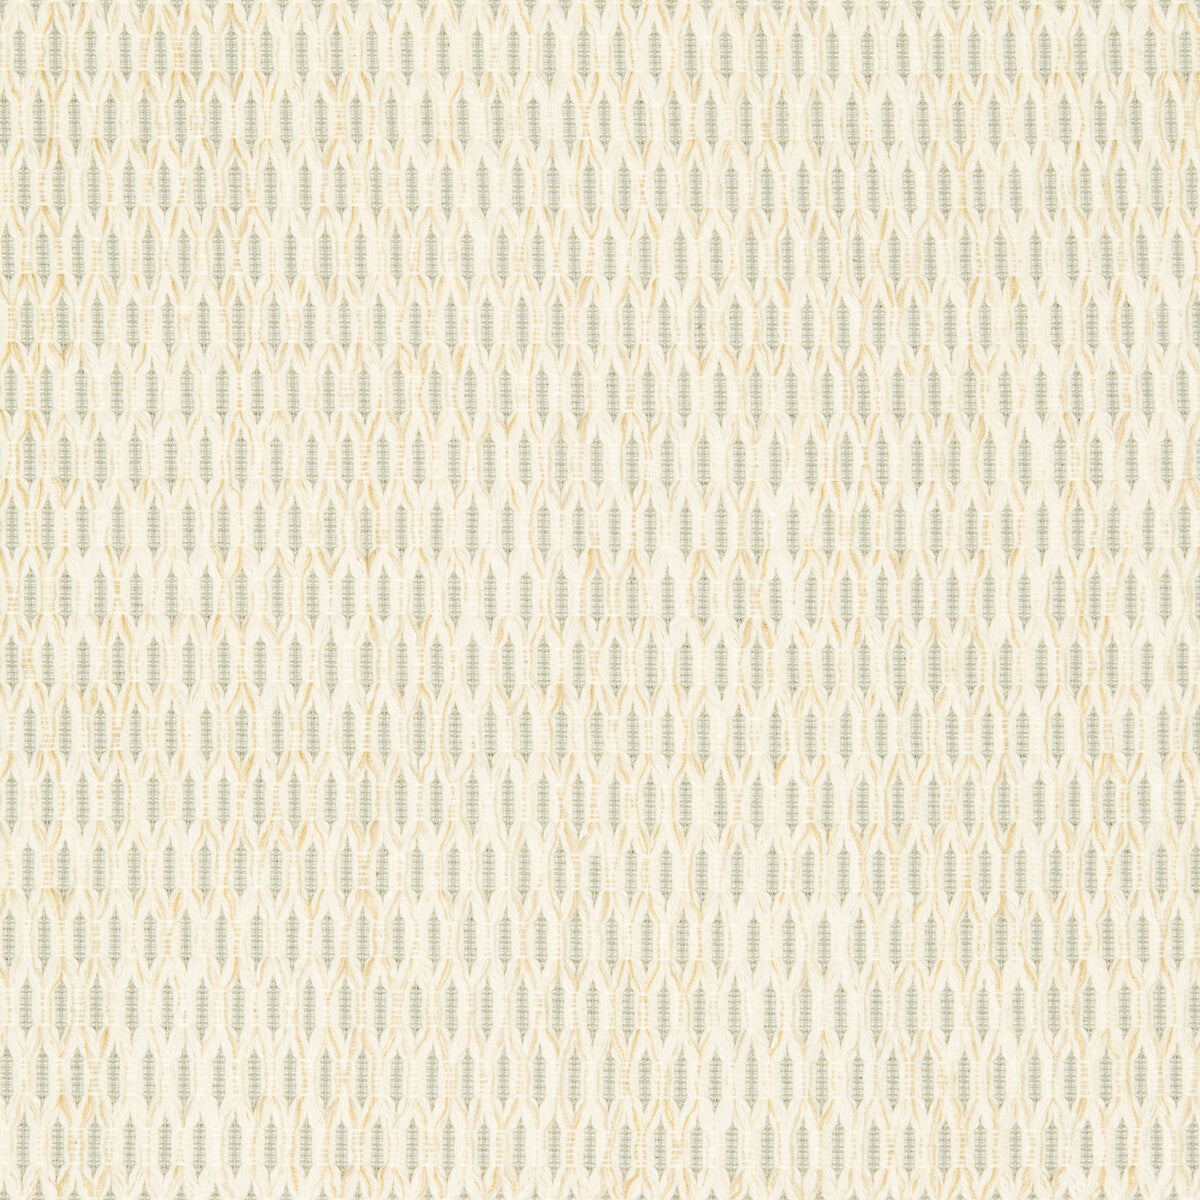 Kravet Design fabric in 34698-11 color - pattern 34698.11.0 - by Kravet Design in the Crypton Home collection